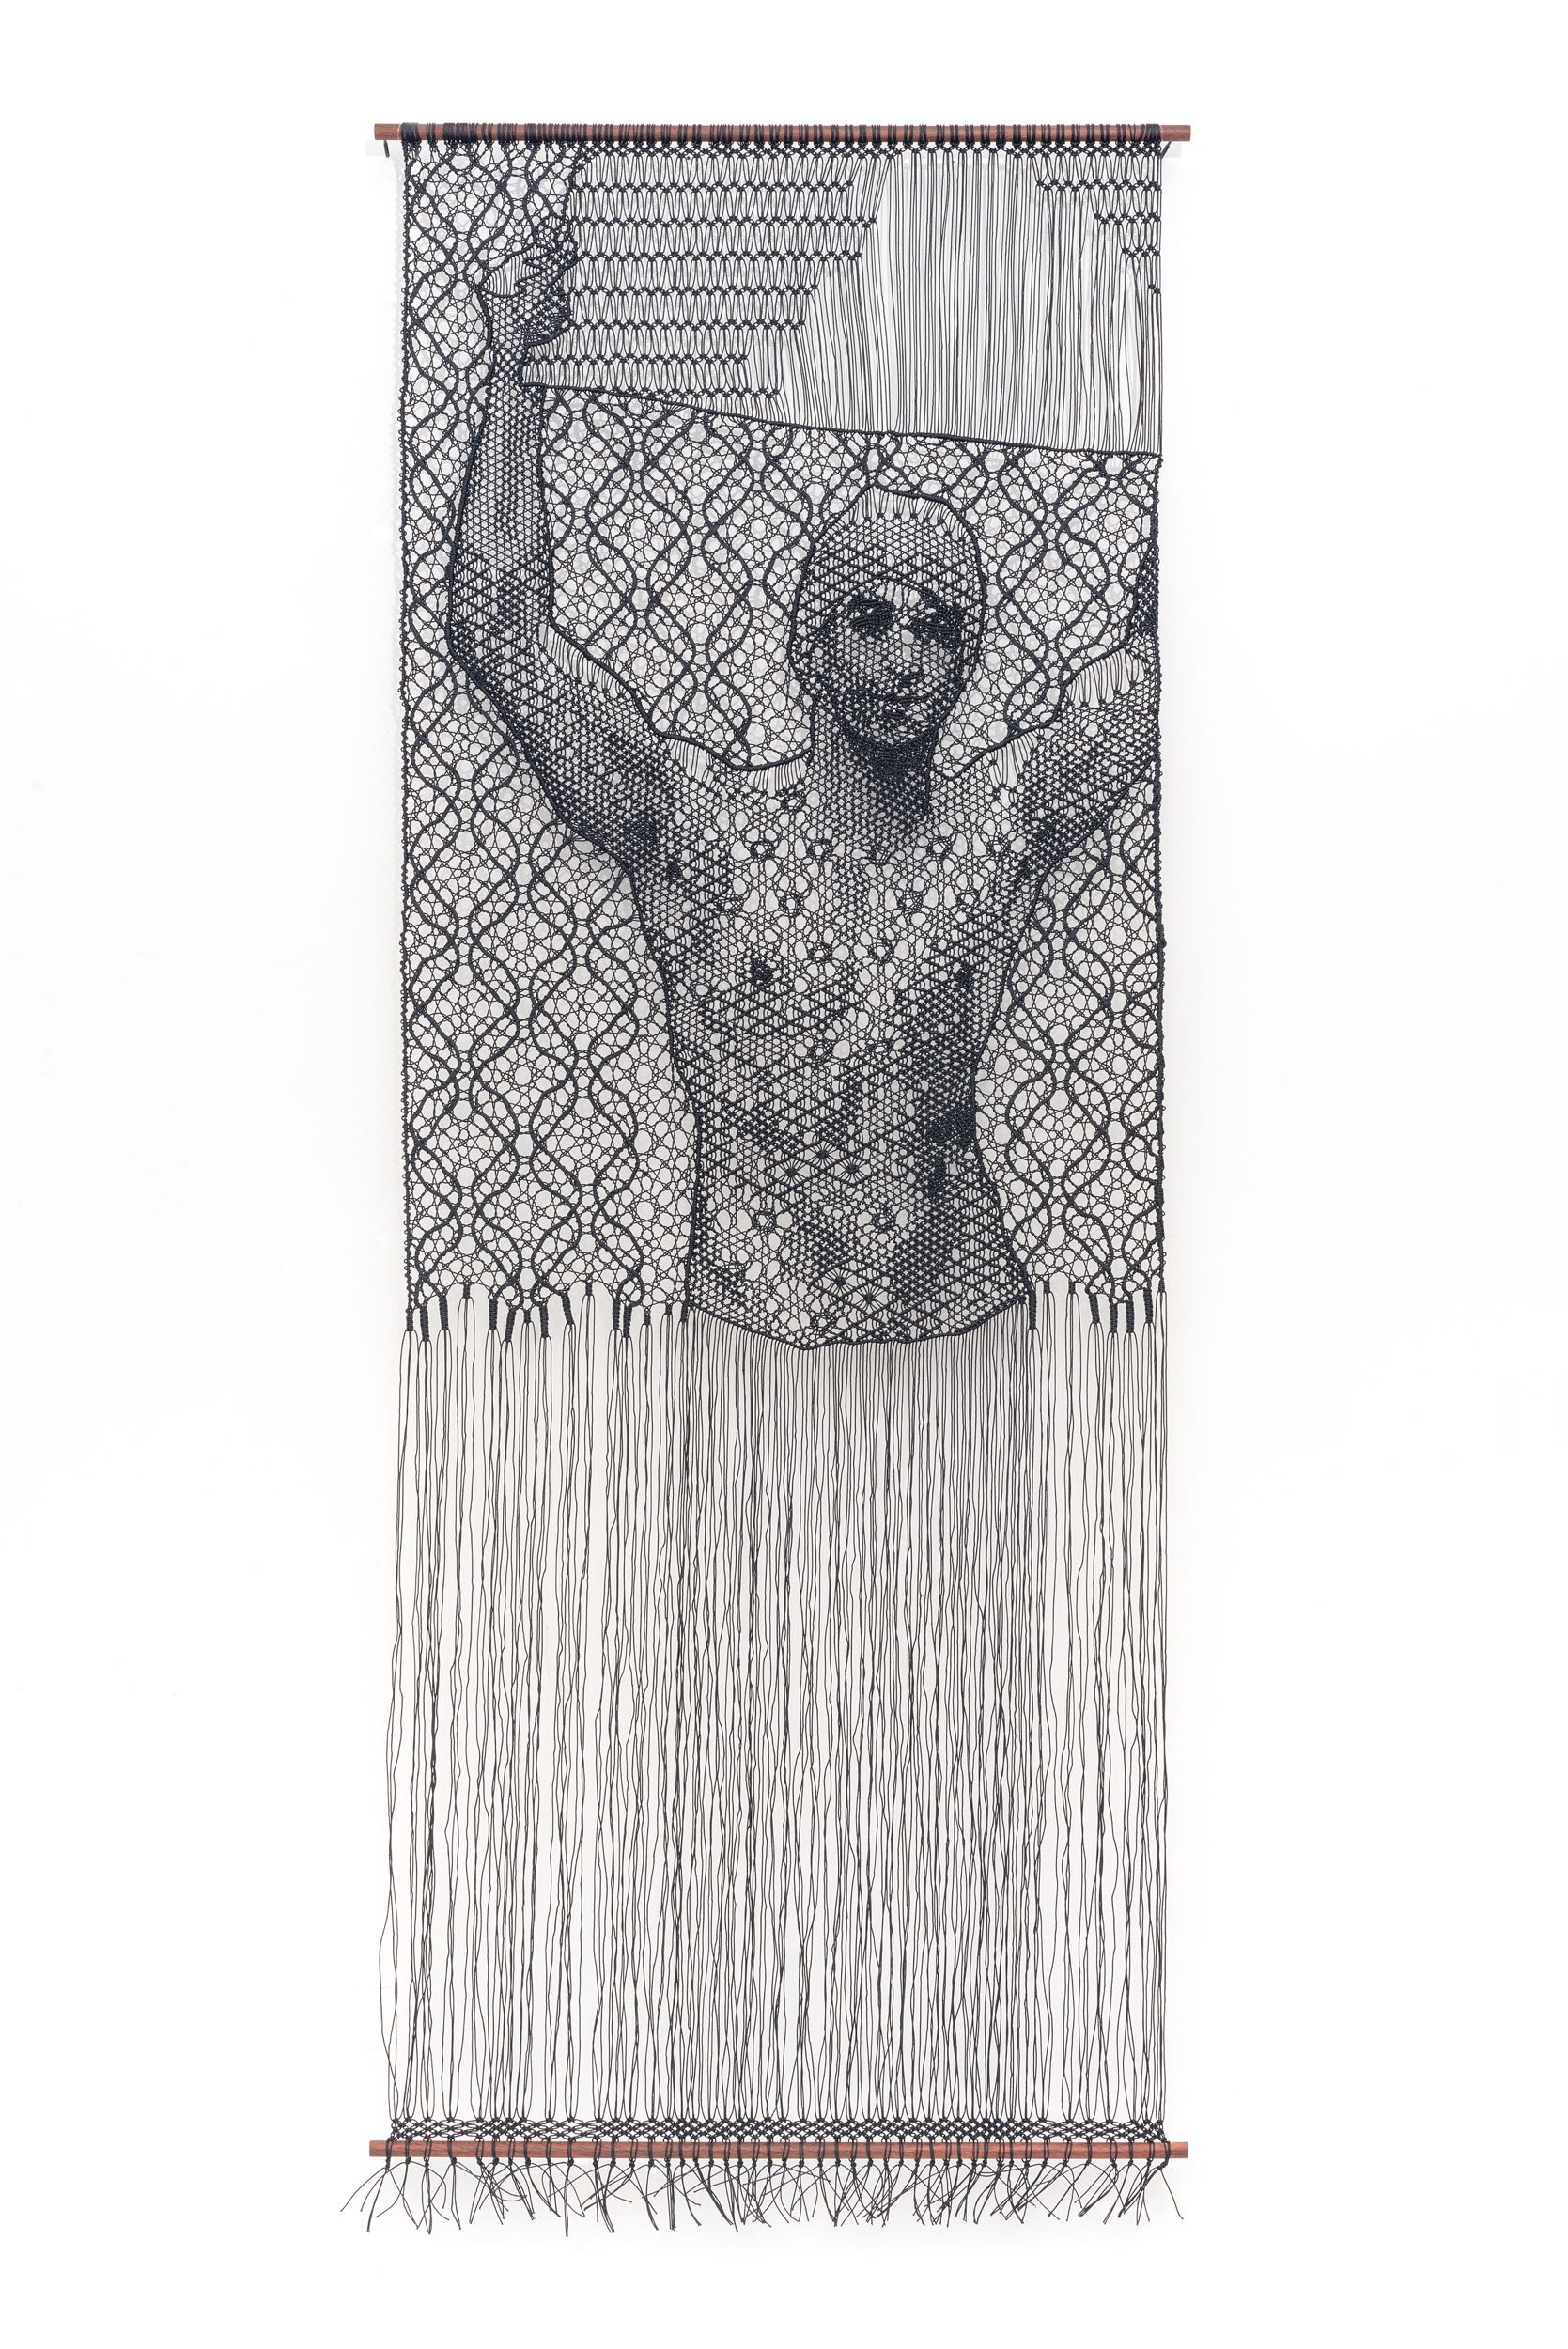 Pierre Fouché. The Judgment of Paris (after Wtewael) III. 2018. Bobbin lace and macramé in polyester braid, wood. 208 x 80cm. Private collection.